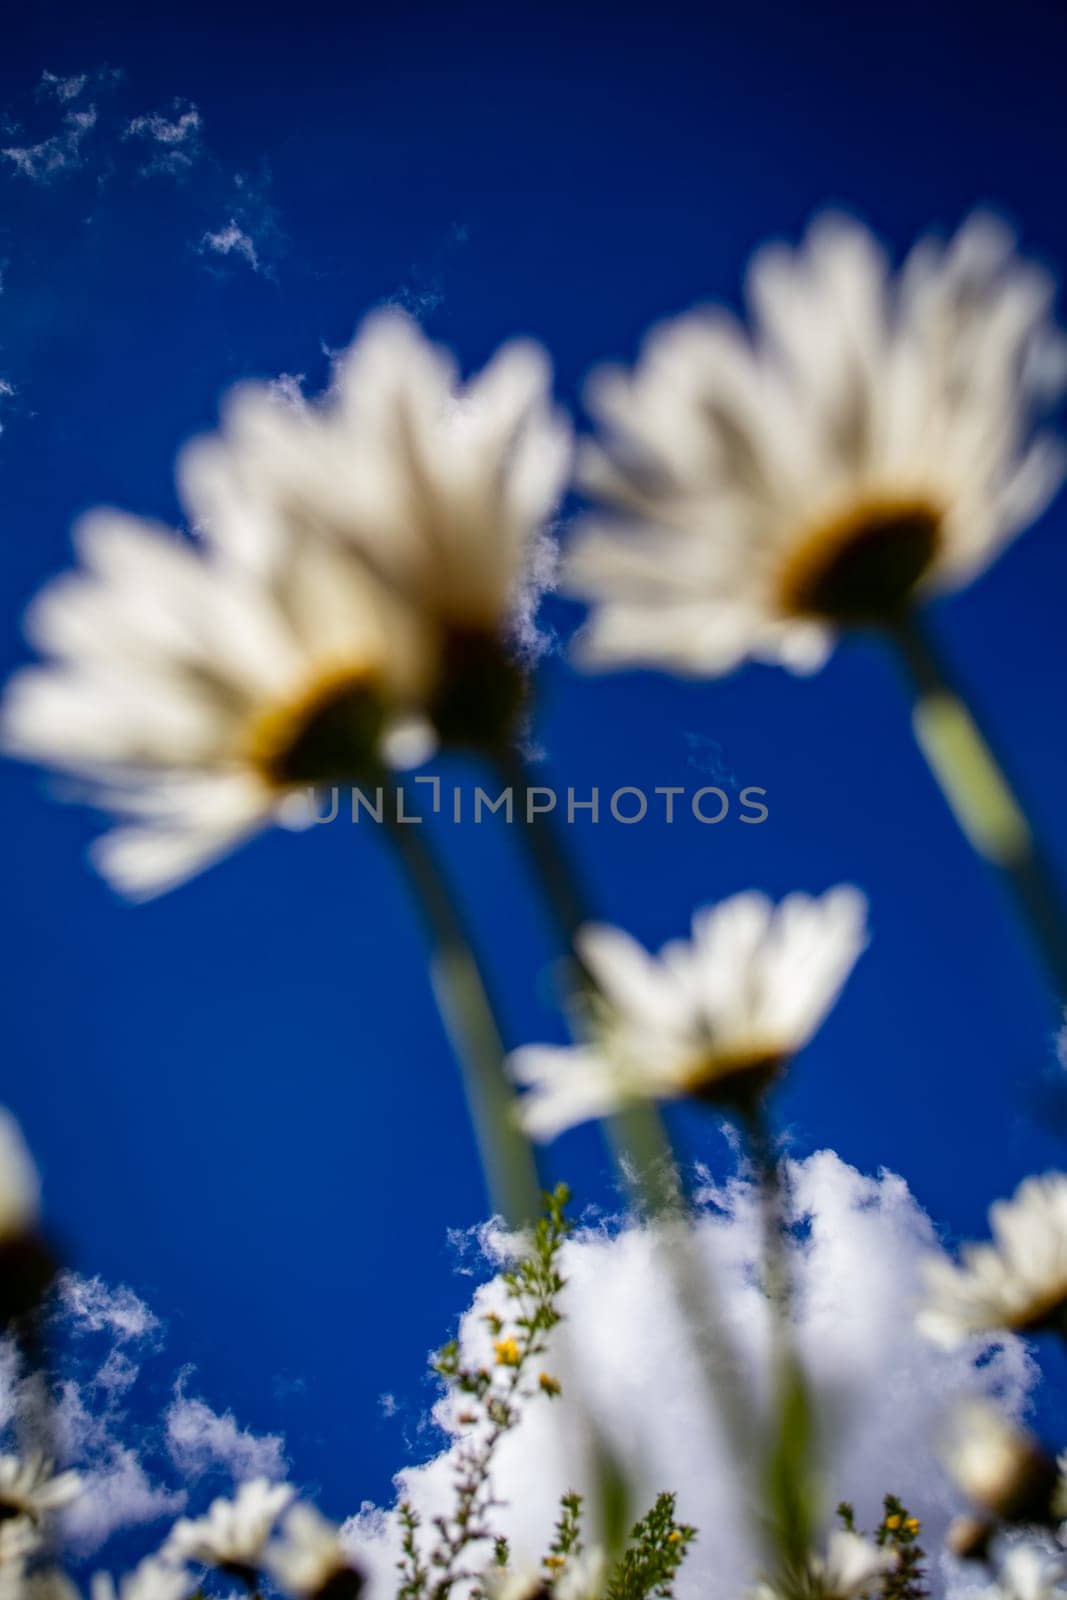 Daisies looking up to the sky. Clouds in focus